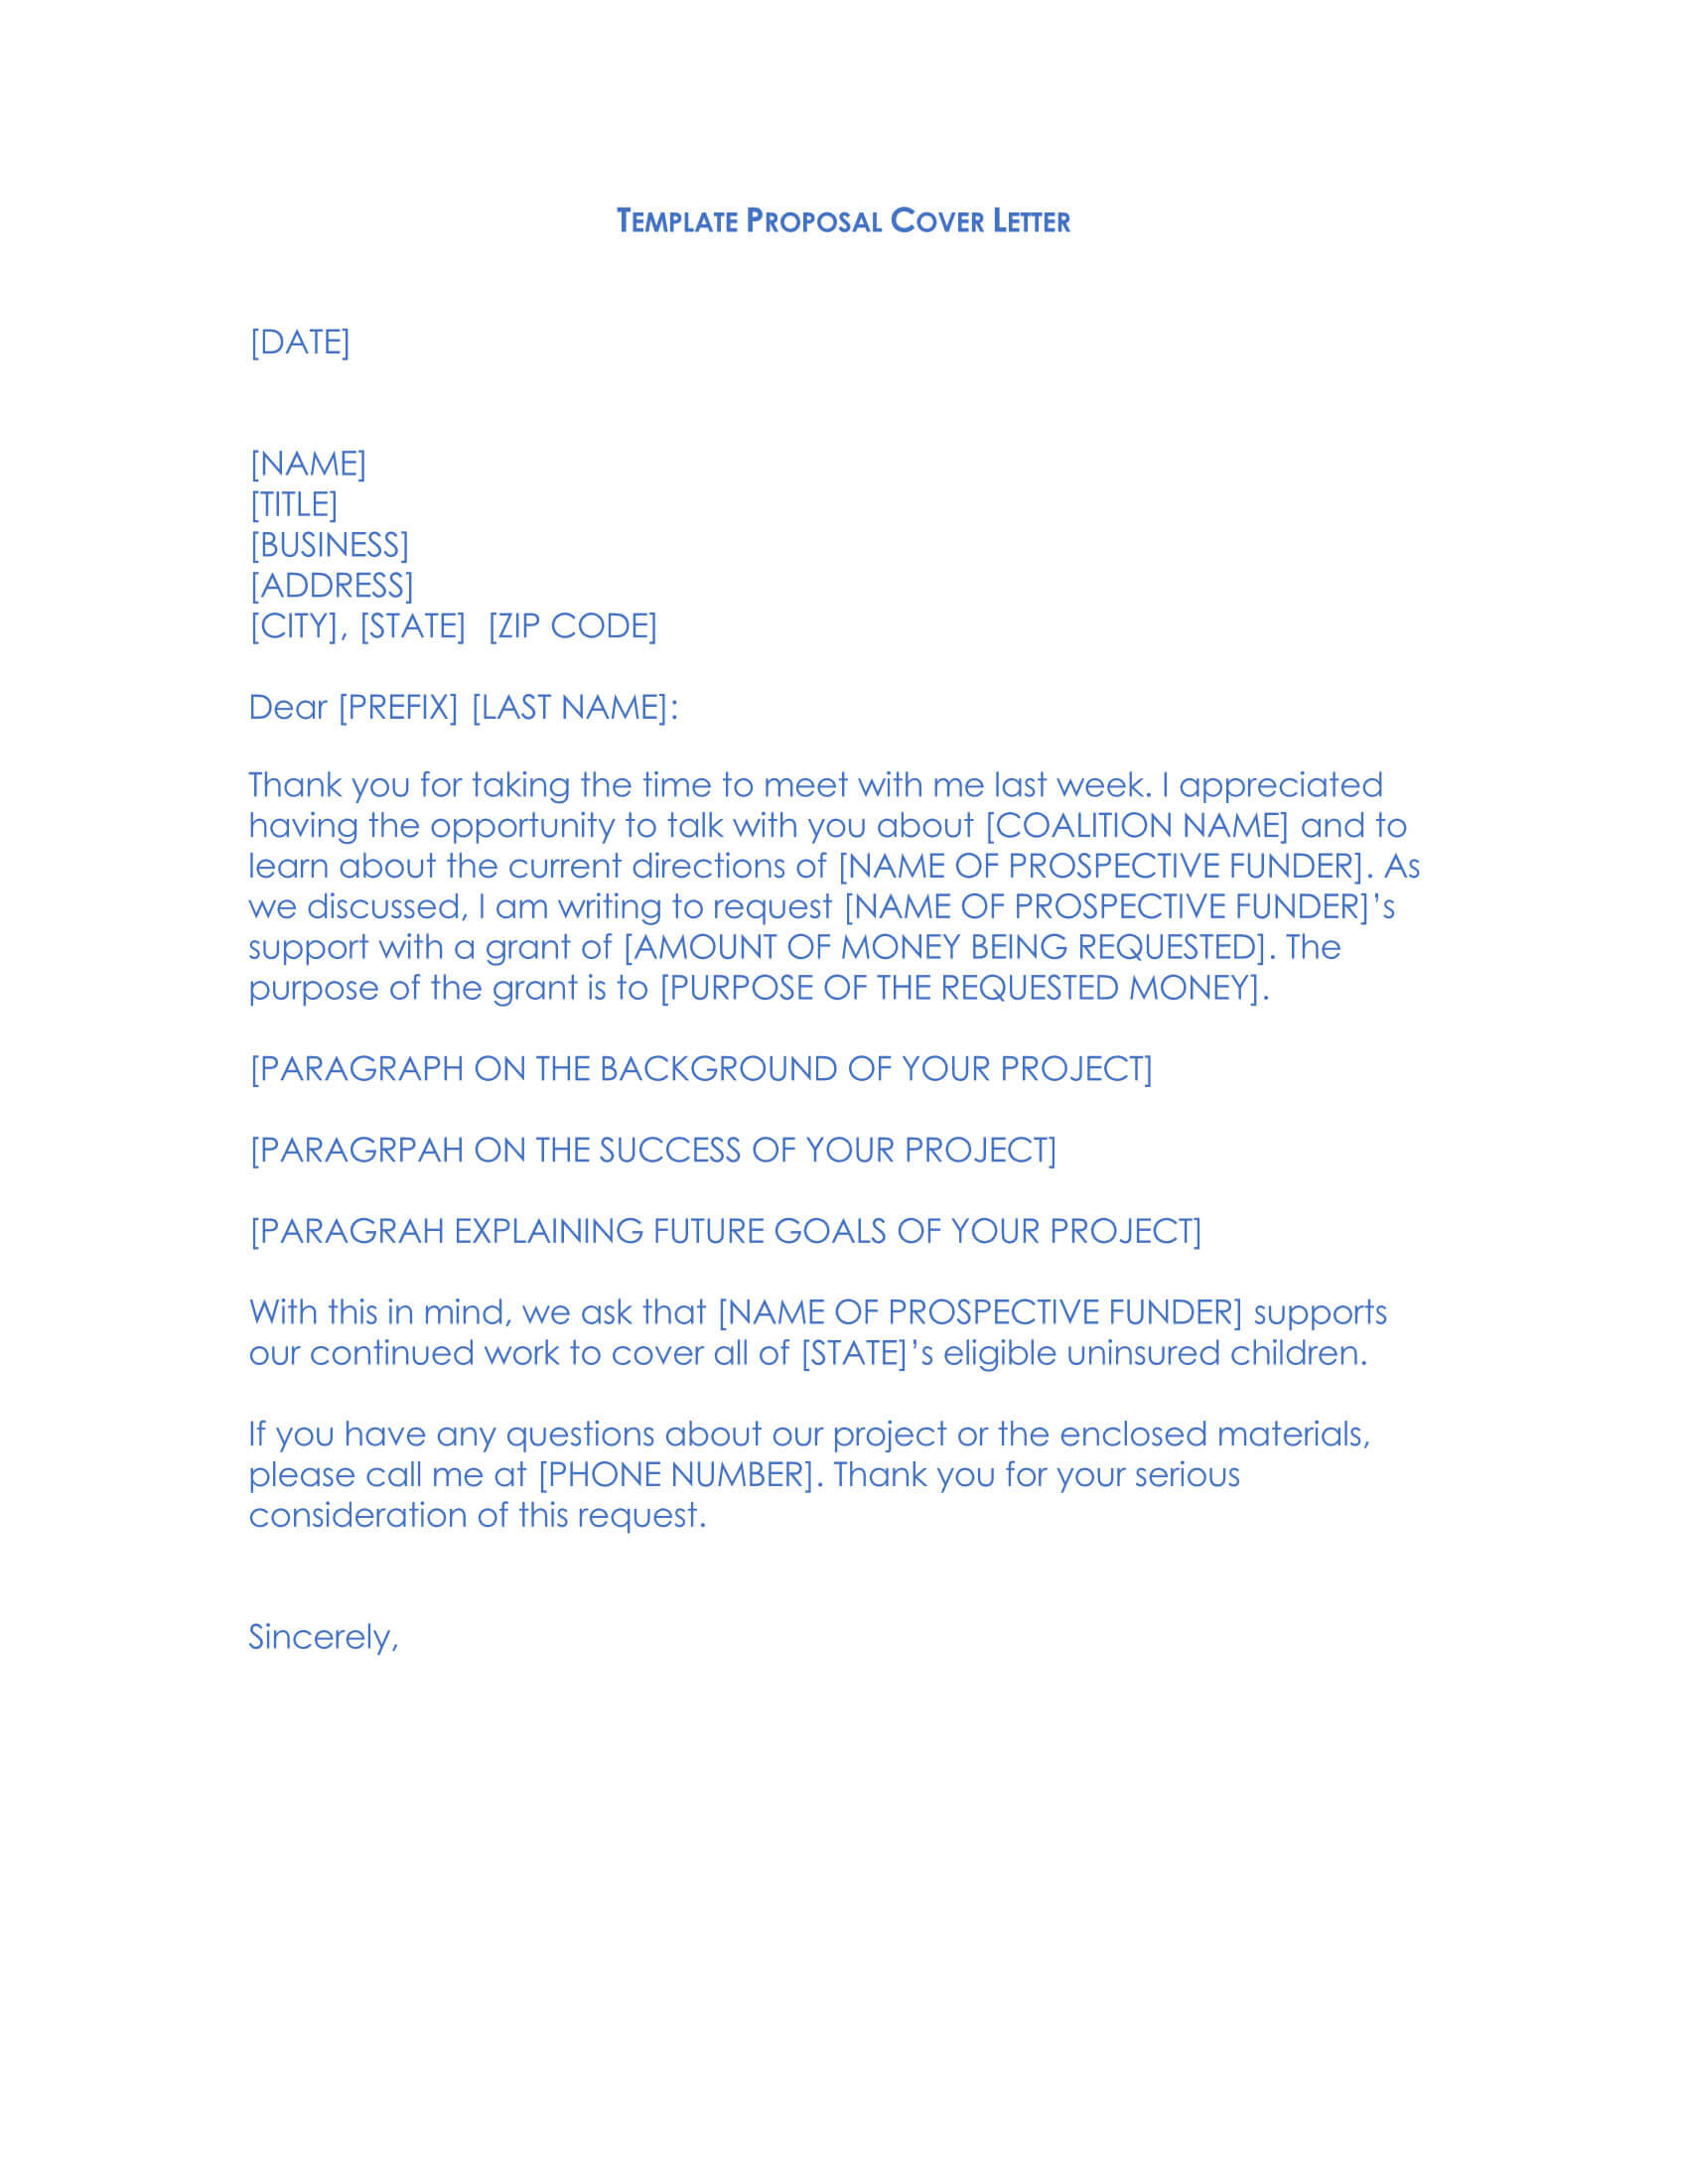 sample cover letter requesting for funding